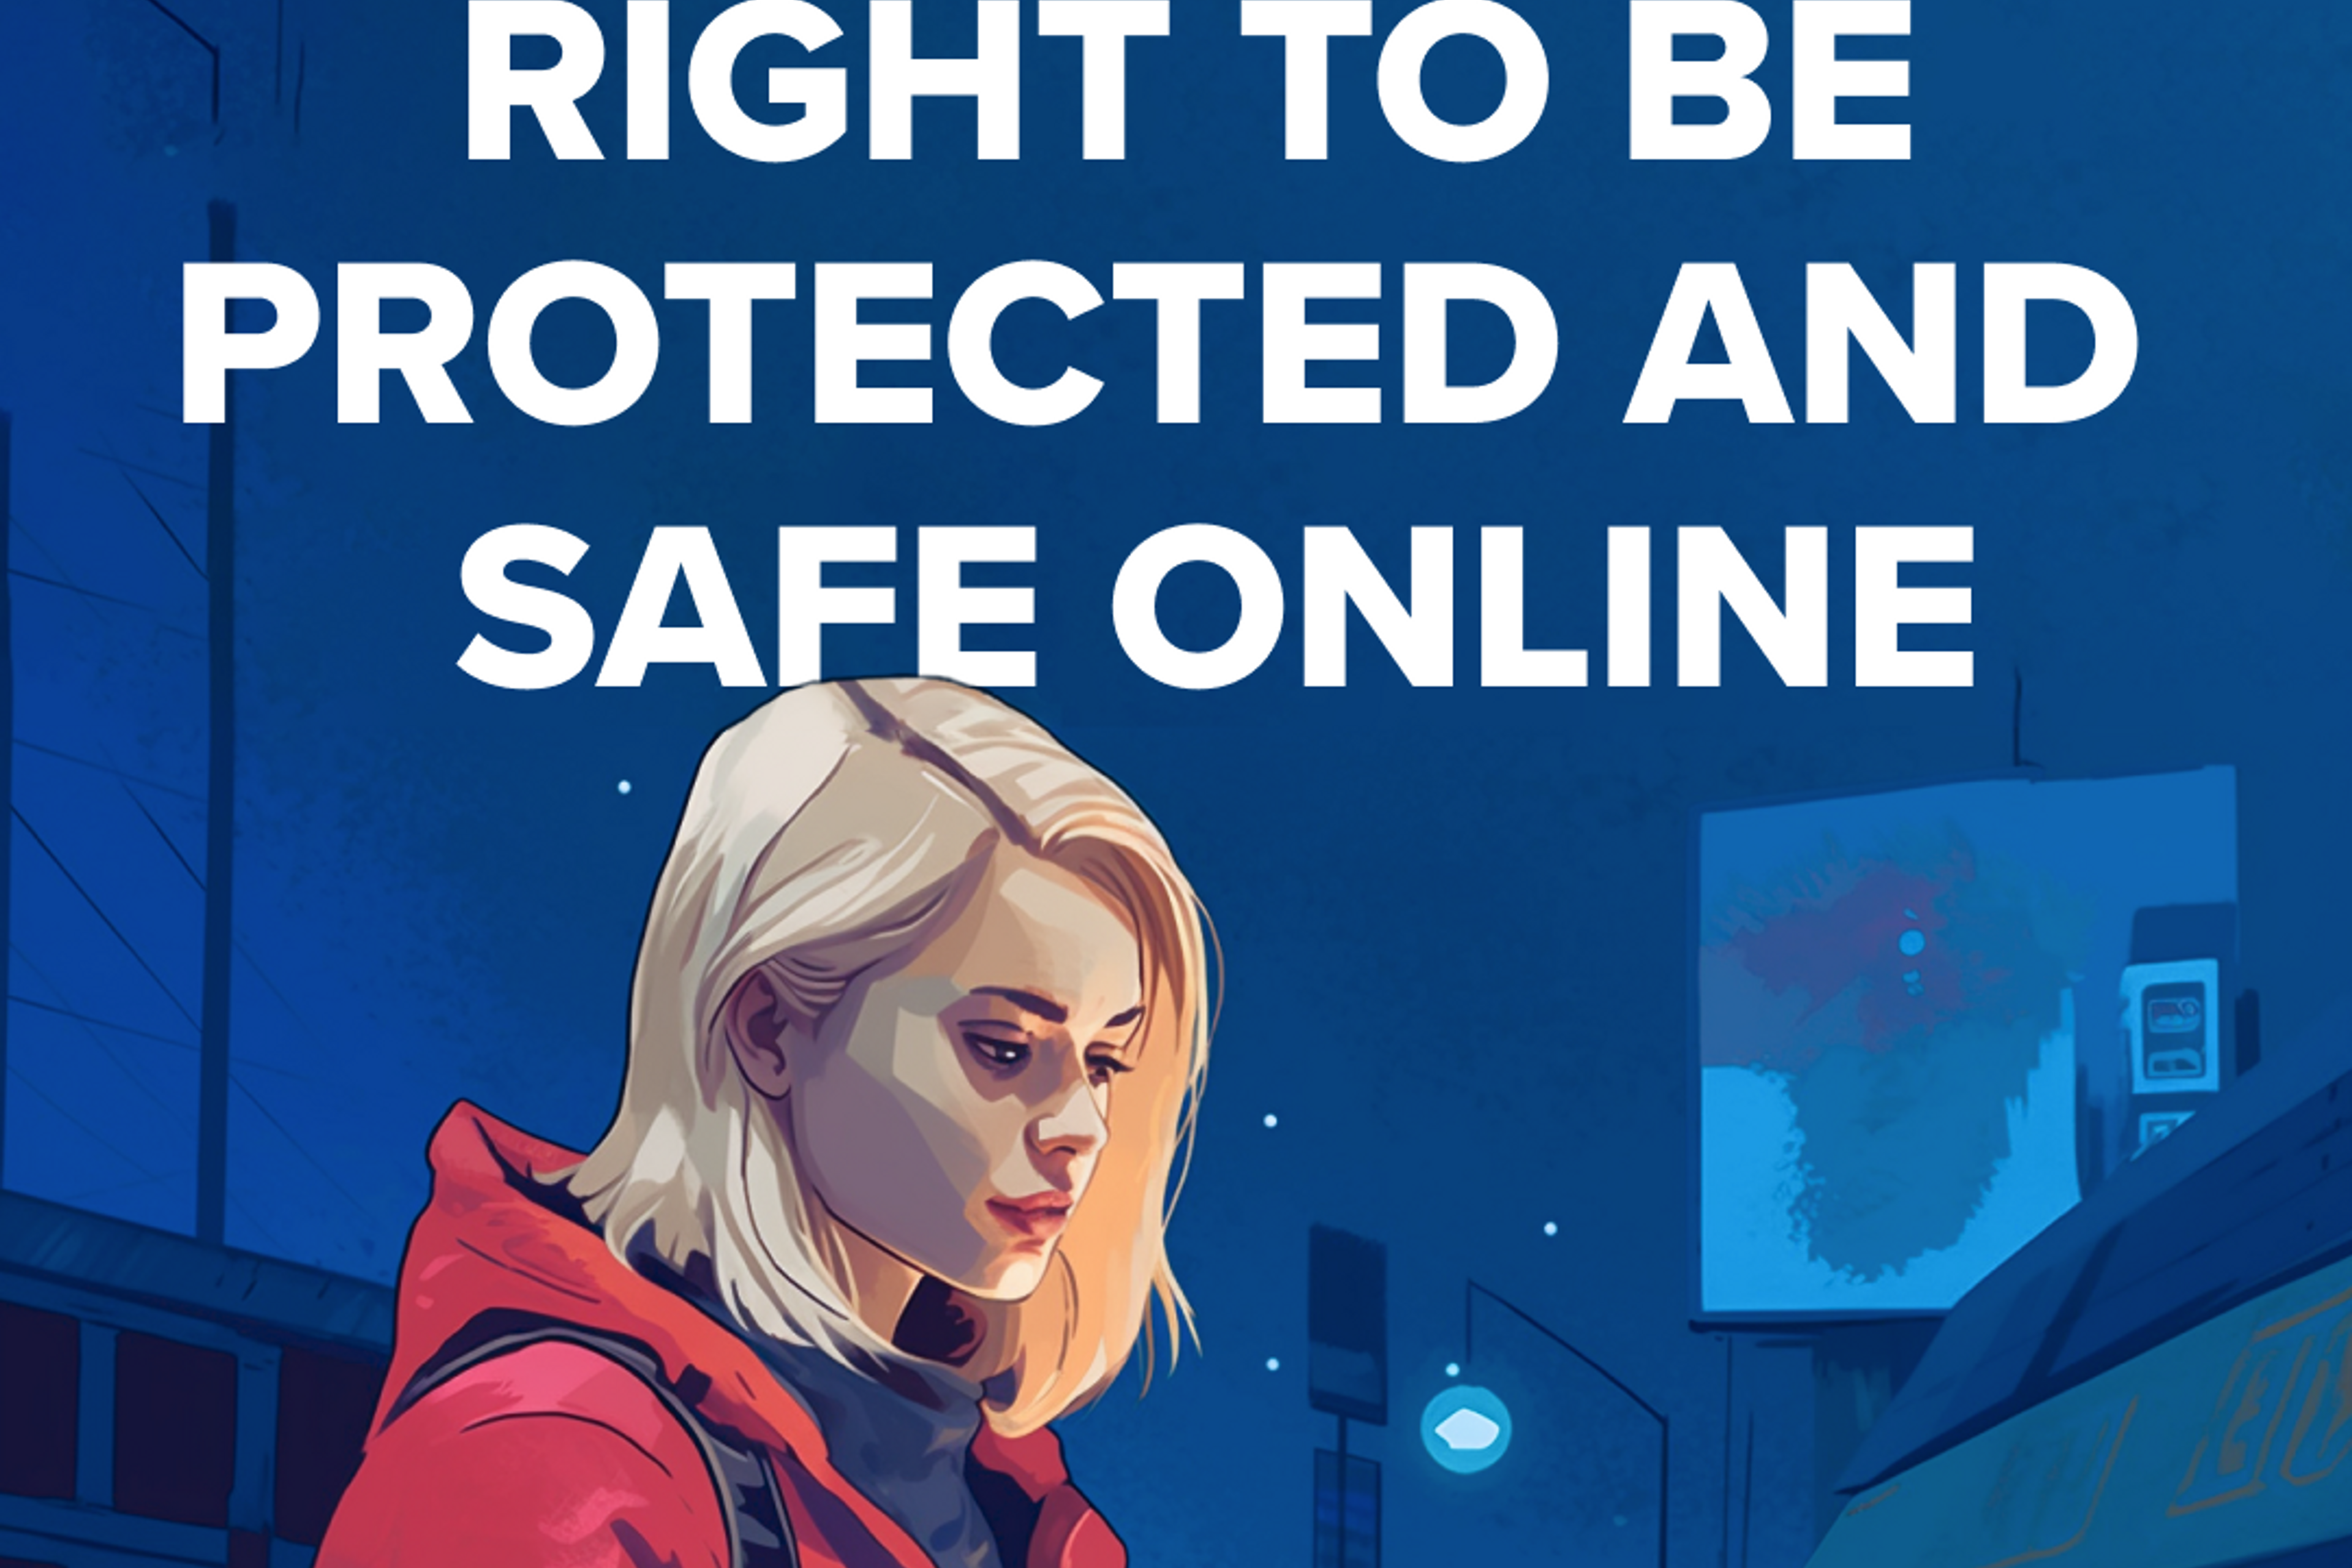 Illustration of young woman with a smartphone, including the text "You have the right to be protected and safe online".